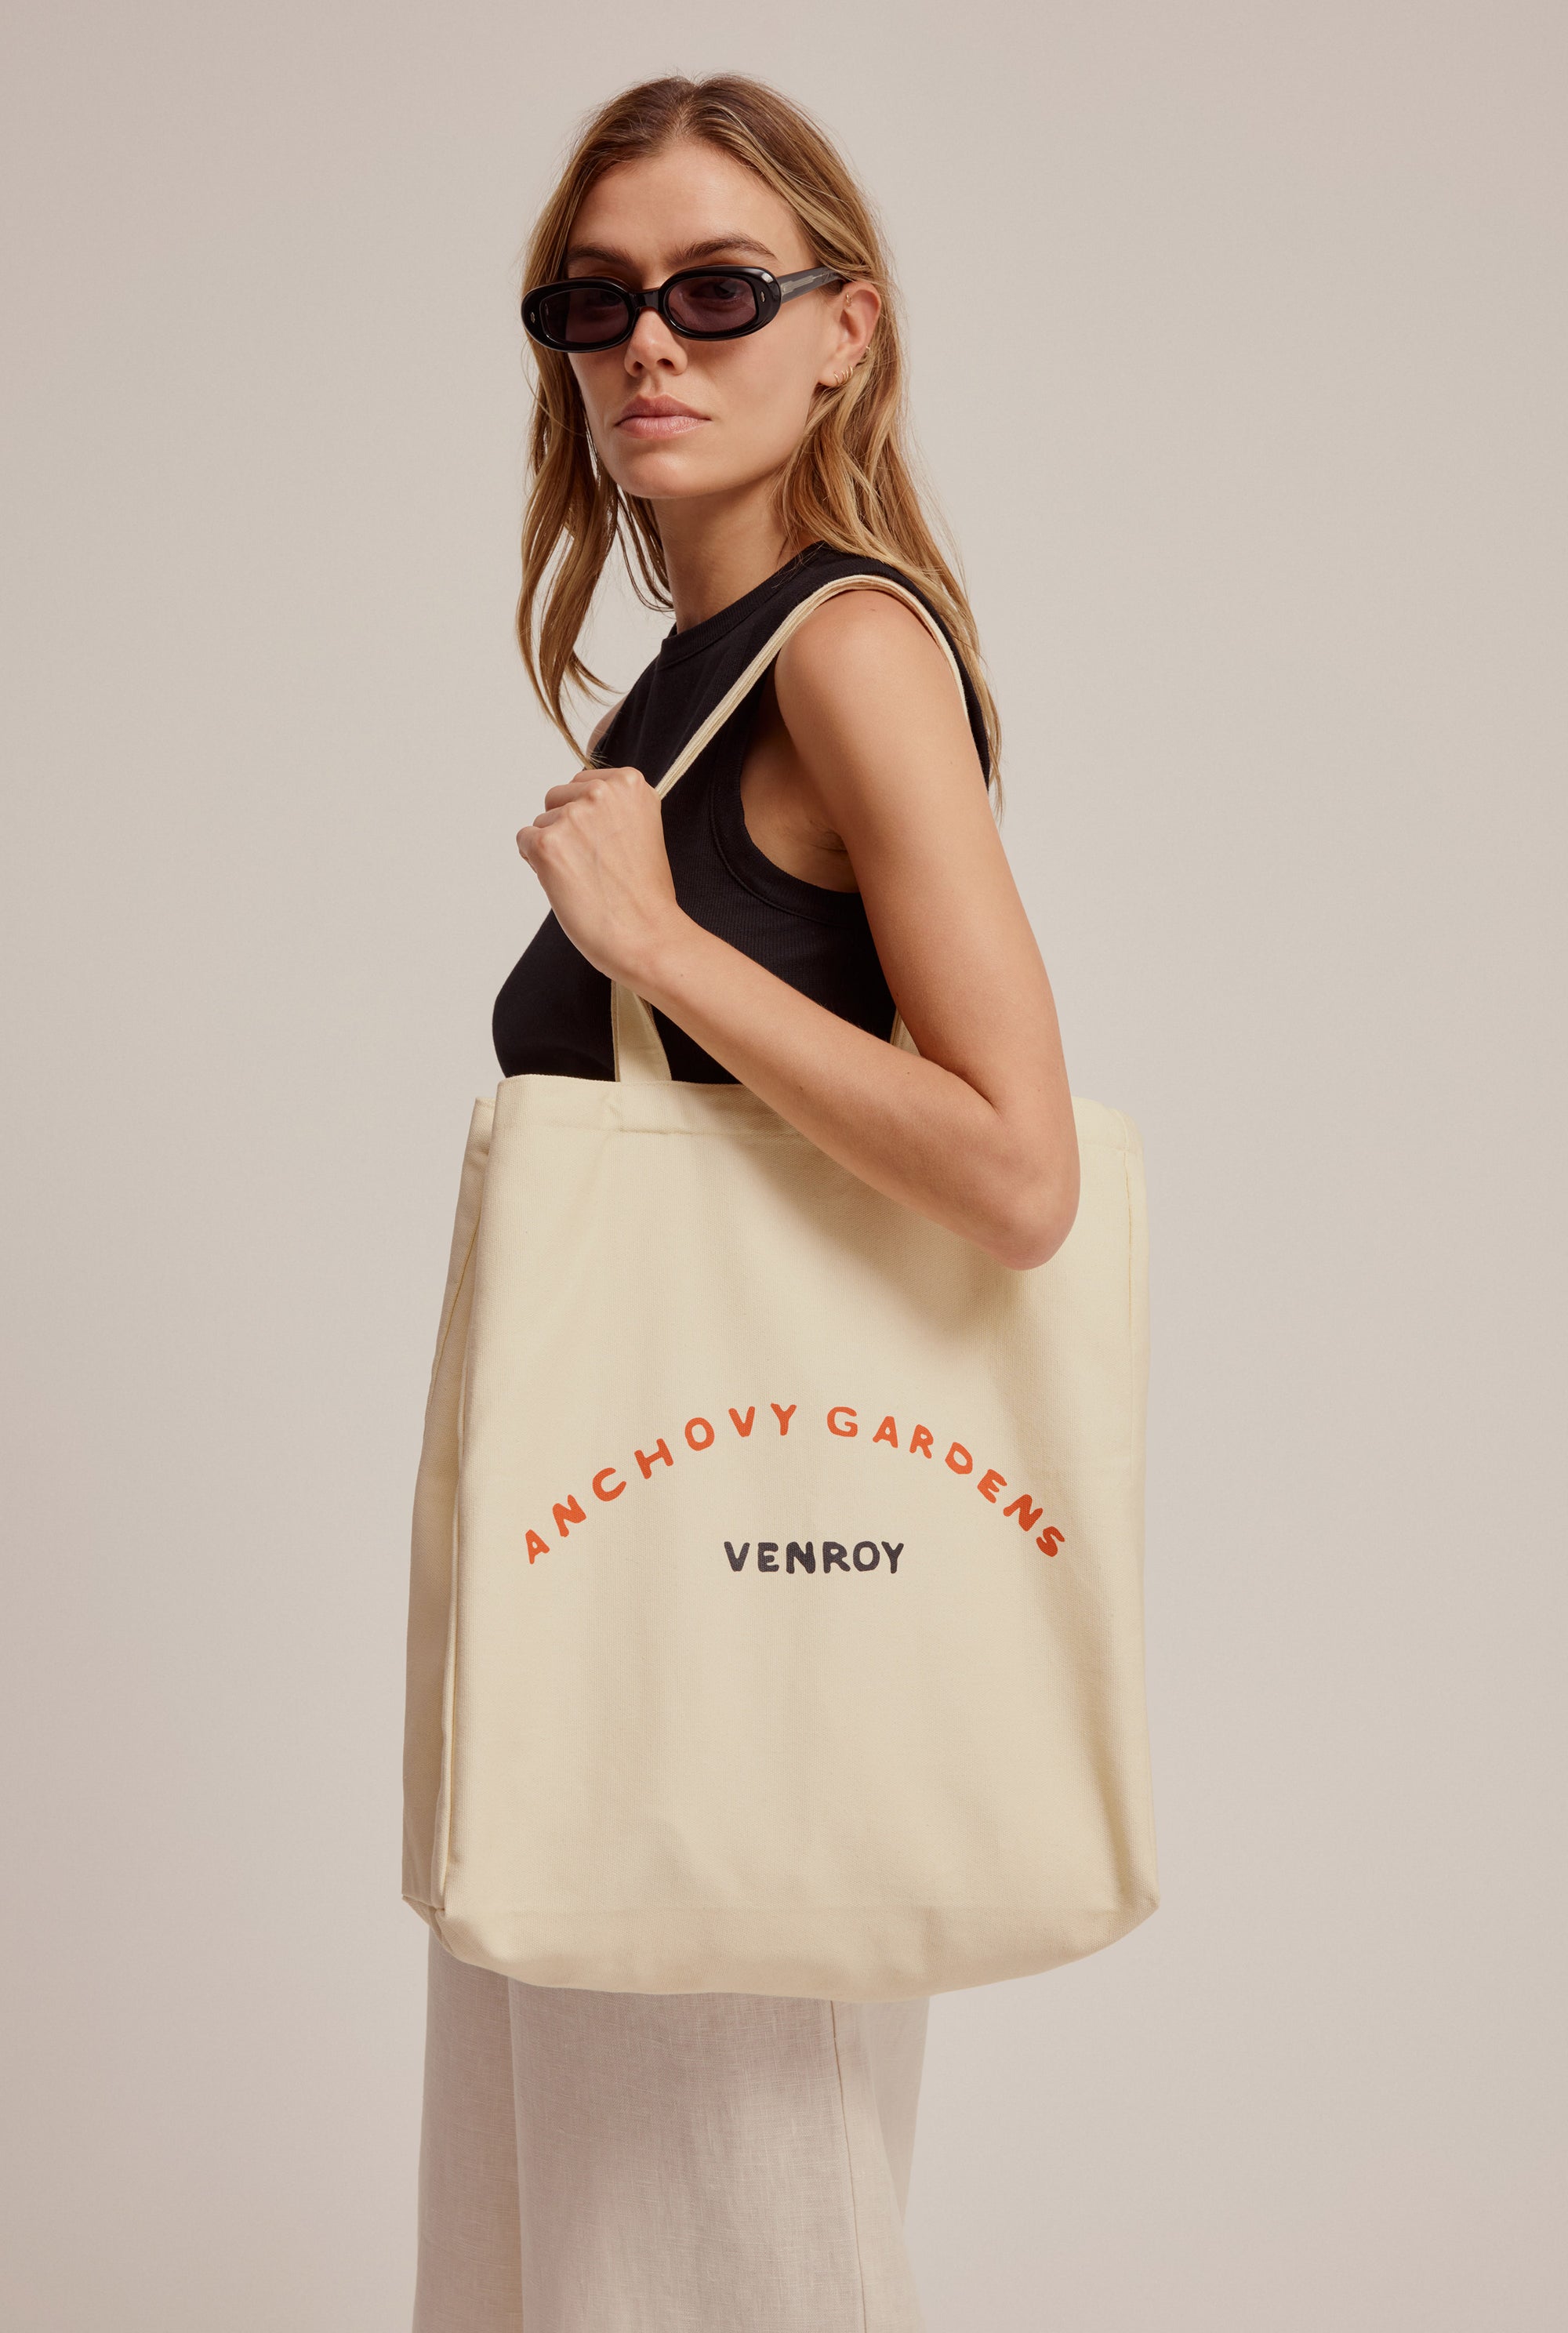 Anchovy Gardens Logo Canvas Tote - Pastel Yellow